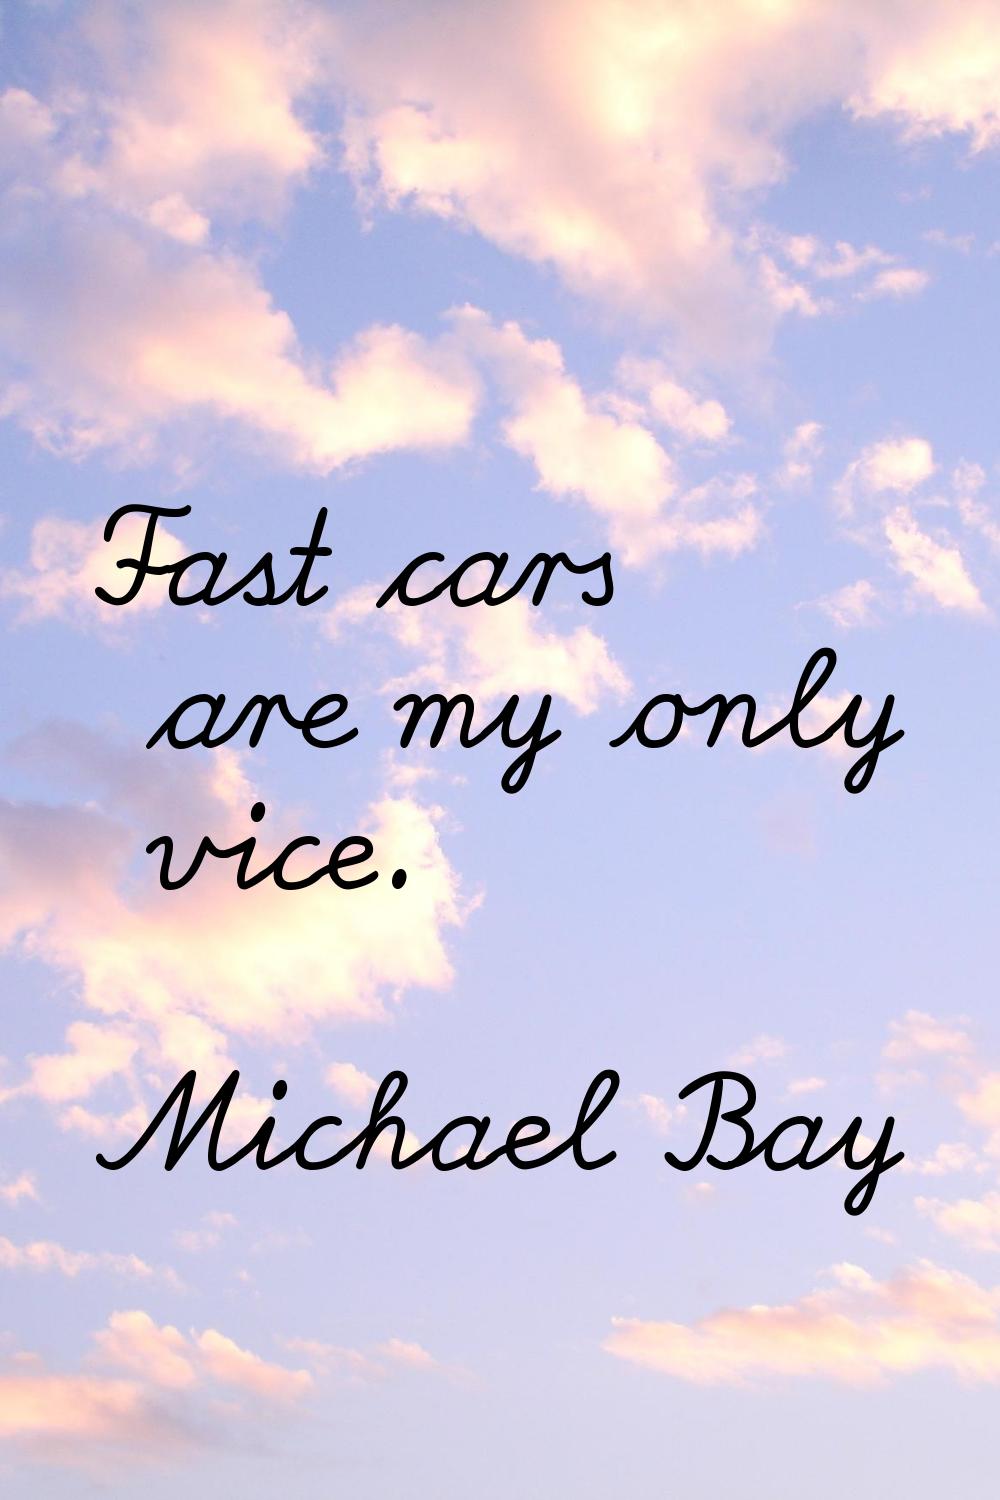 Fast cars are my only vice.